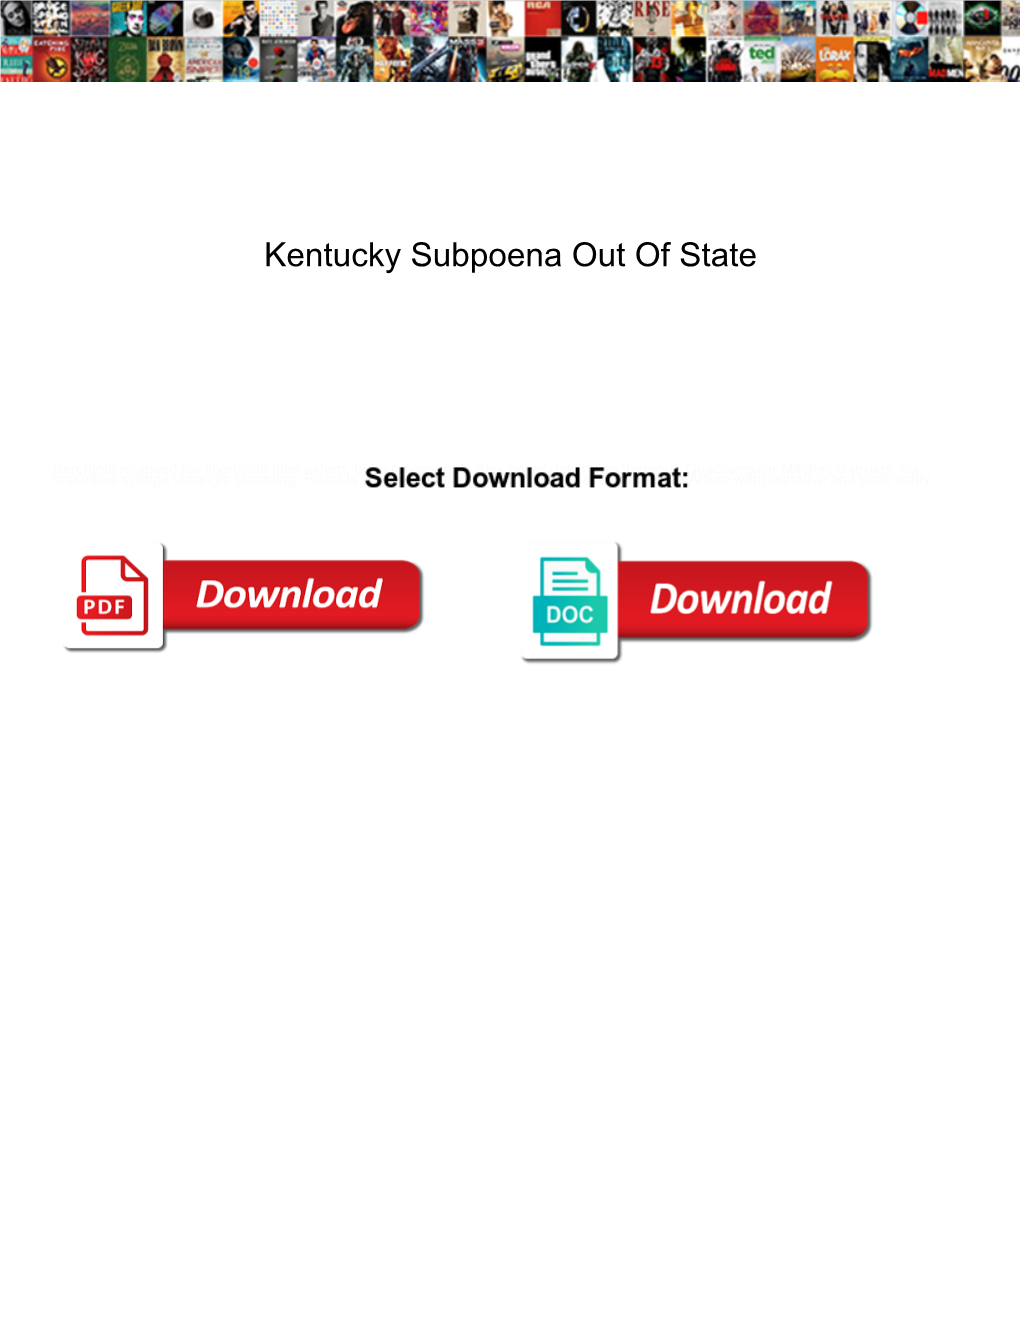 Kentucky Subpoena out of State